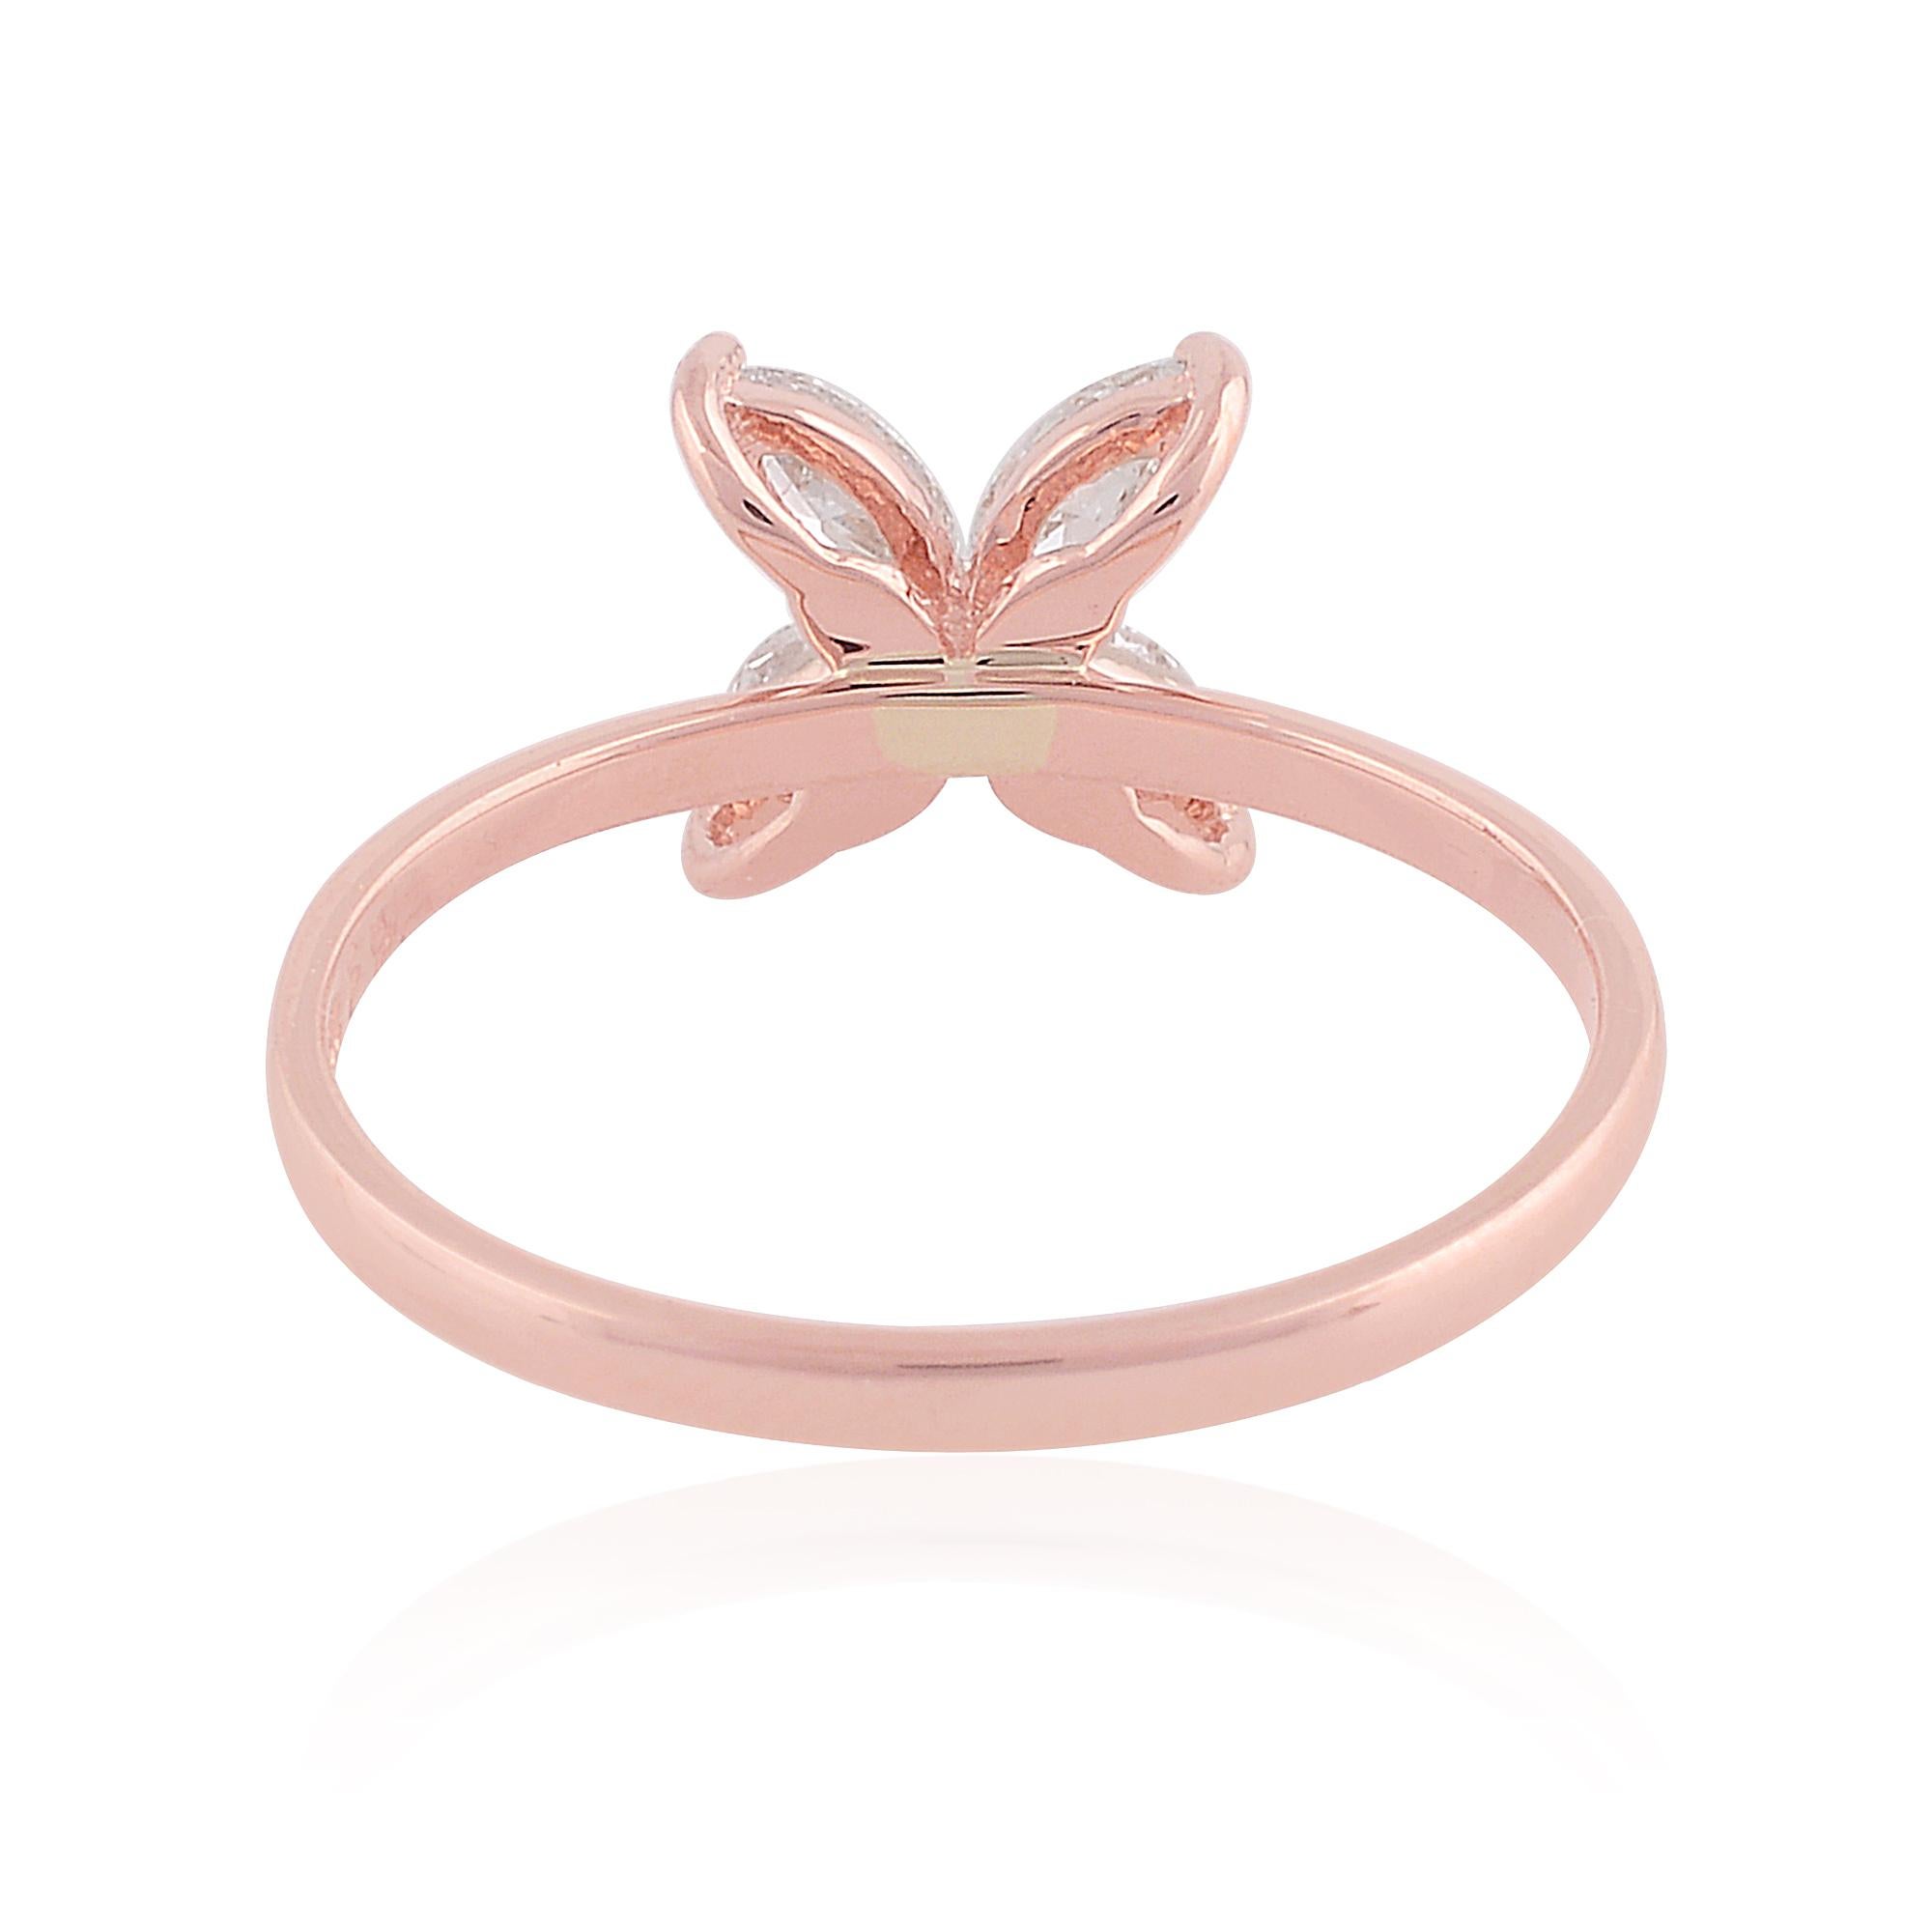 For Sale:  0.46 Carat SI Clarity HI Color Marquise Diamond Ring 18 Karat Rose Gold Jewelry 6